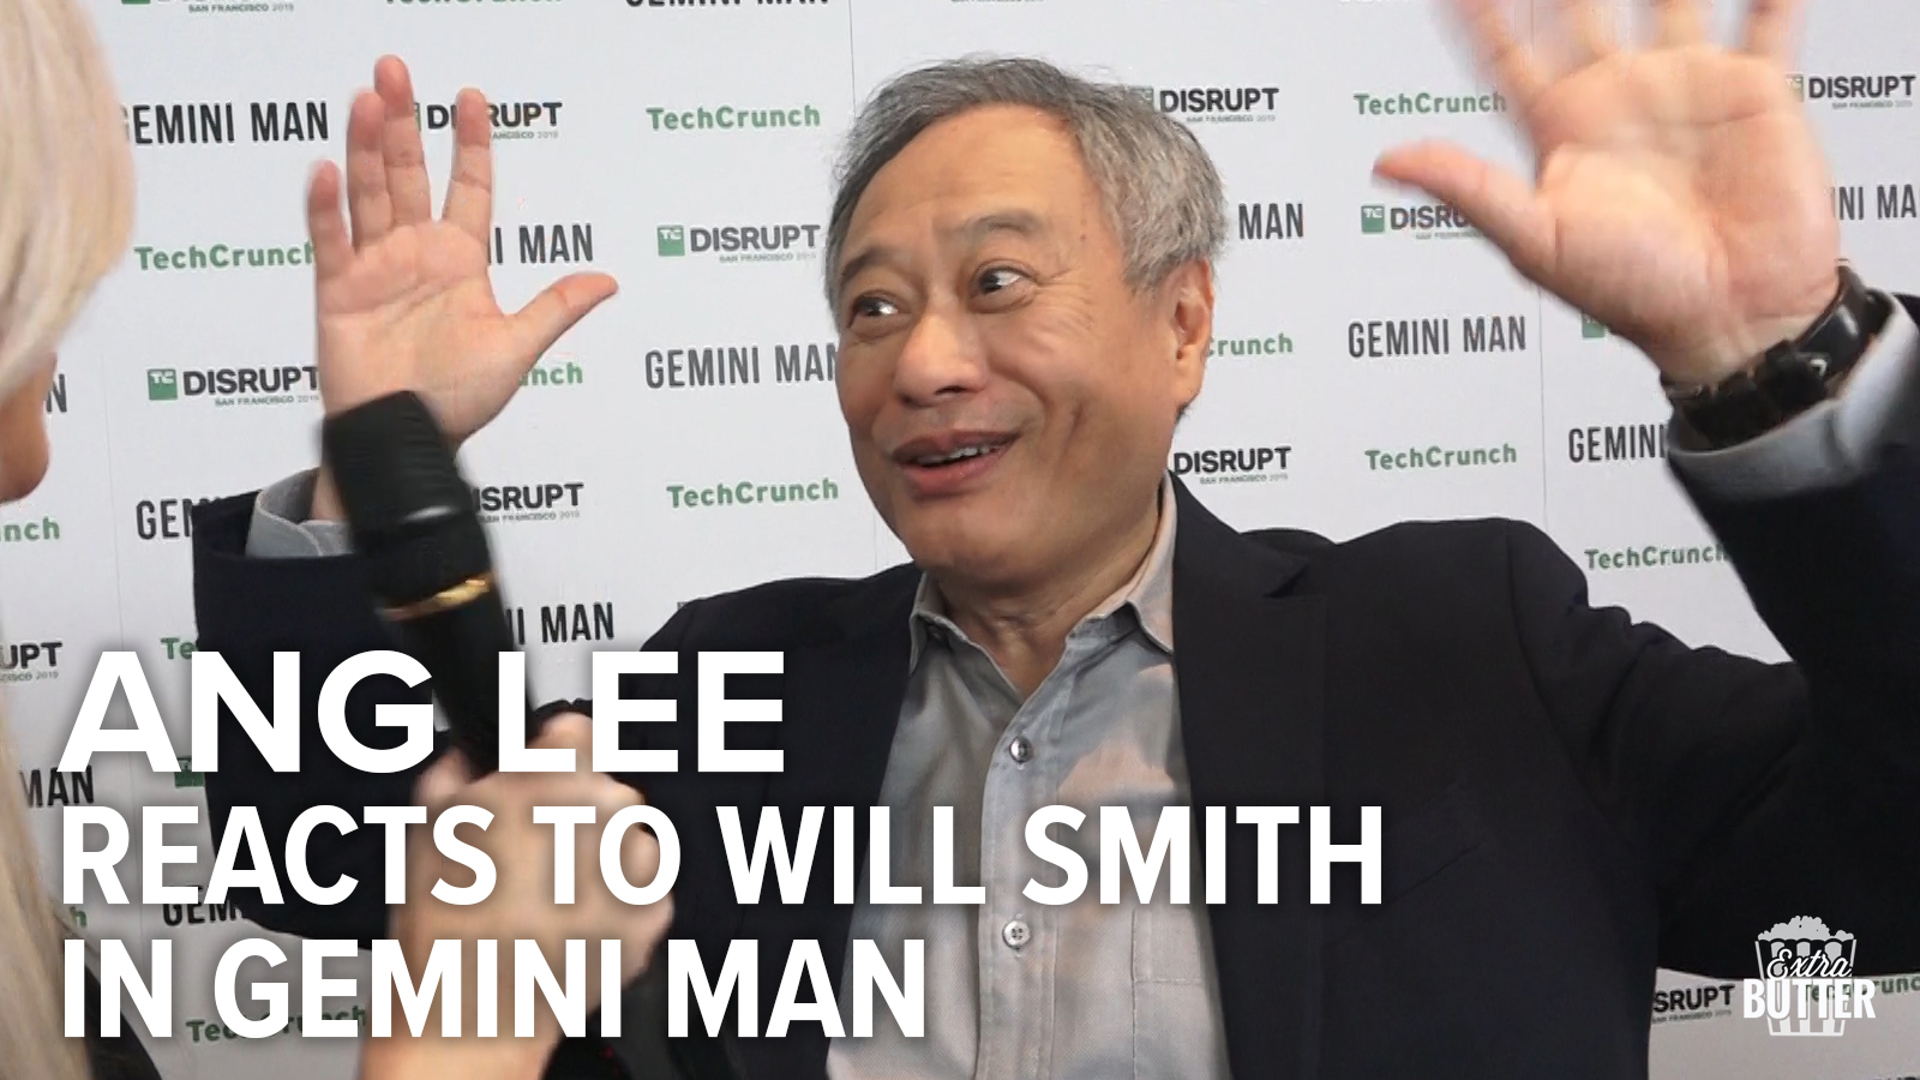 Ang Lee can't hide his excitement when he talks about getting Will Smith to act in his movie 'Gemini Man.' The director also talks about Will's growth as an actor.